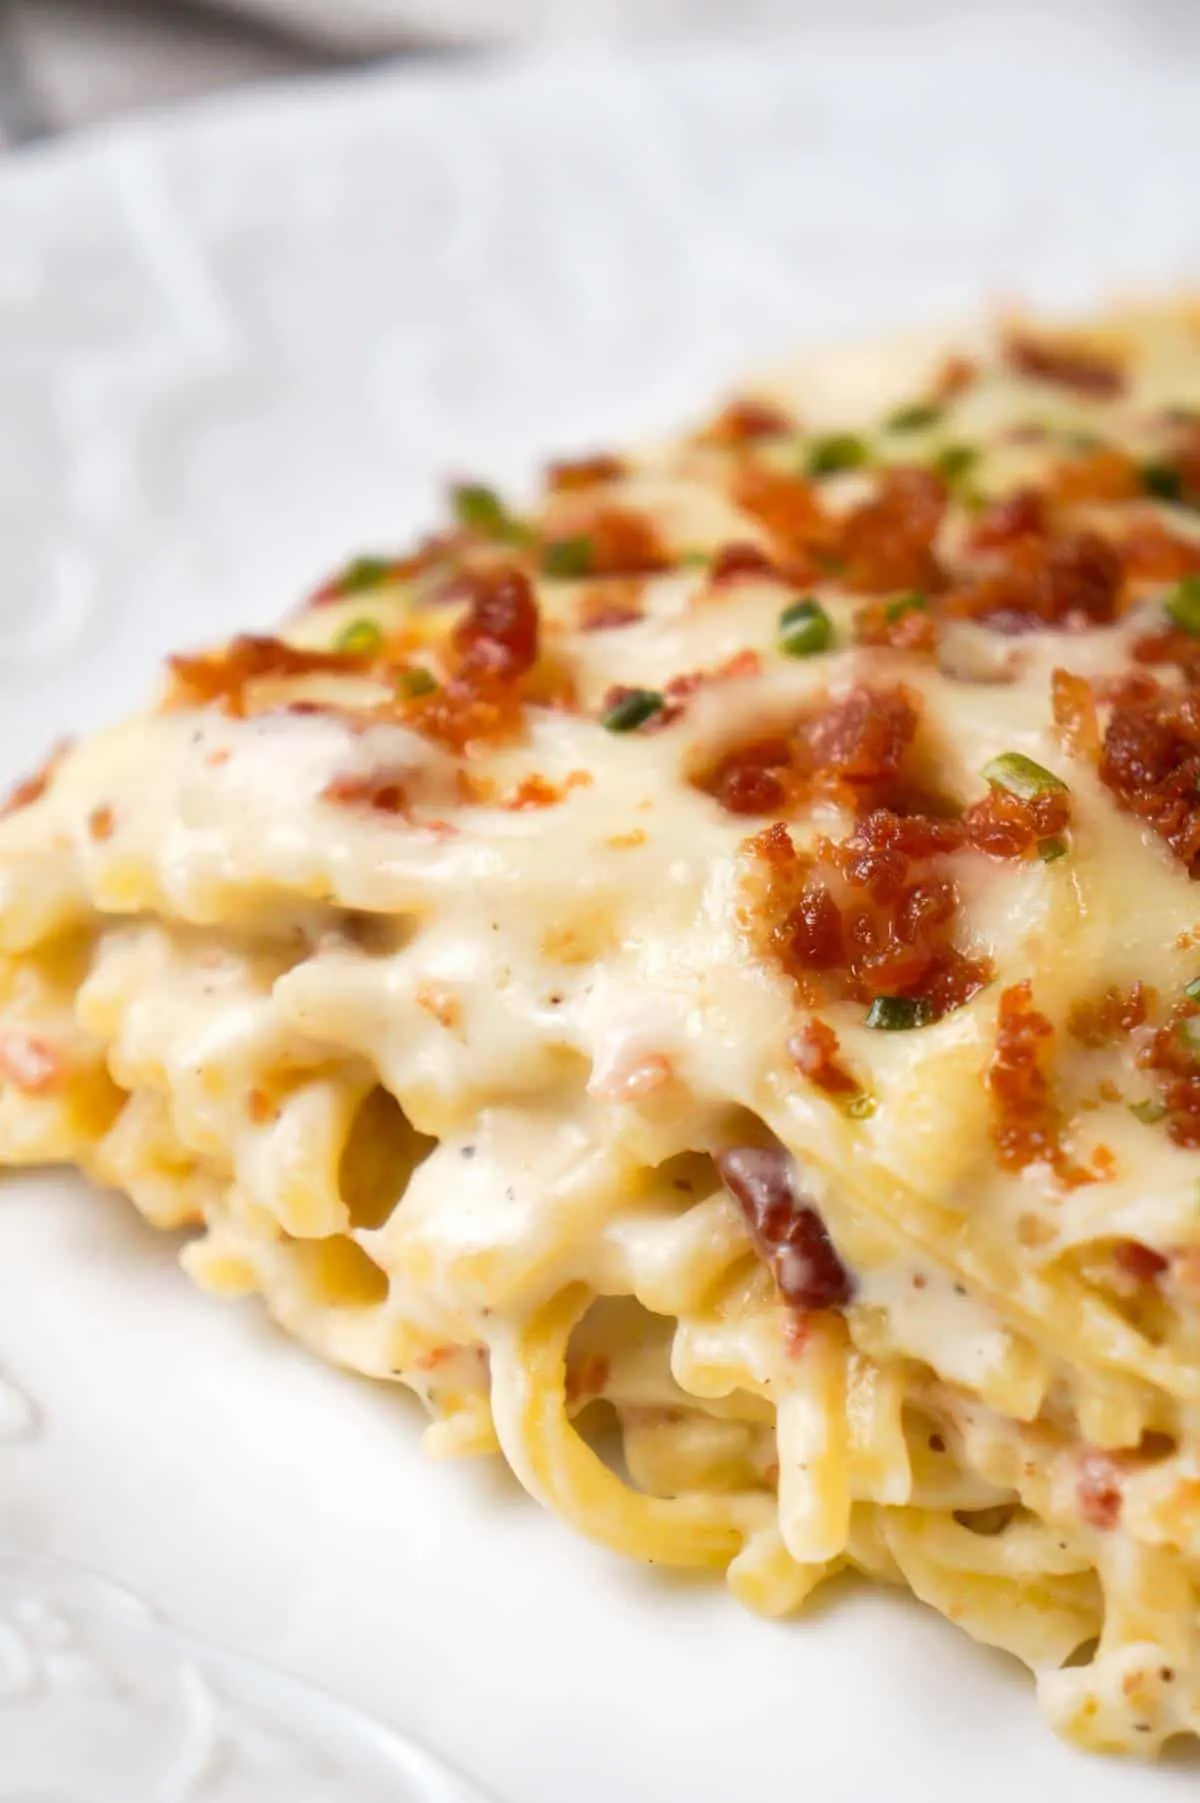 Bacon Cream Cheese Baked Spaghetti is a delicious pasta recipe loaded with crumbled bacon, Philadelphia Whipped Chive cream cheese and mozzarella cheese.